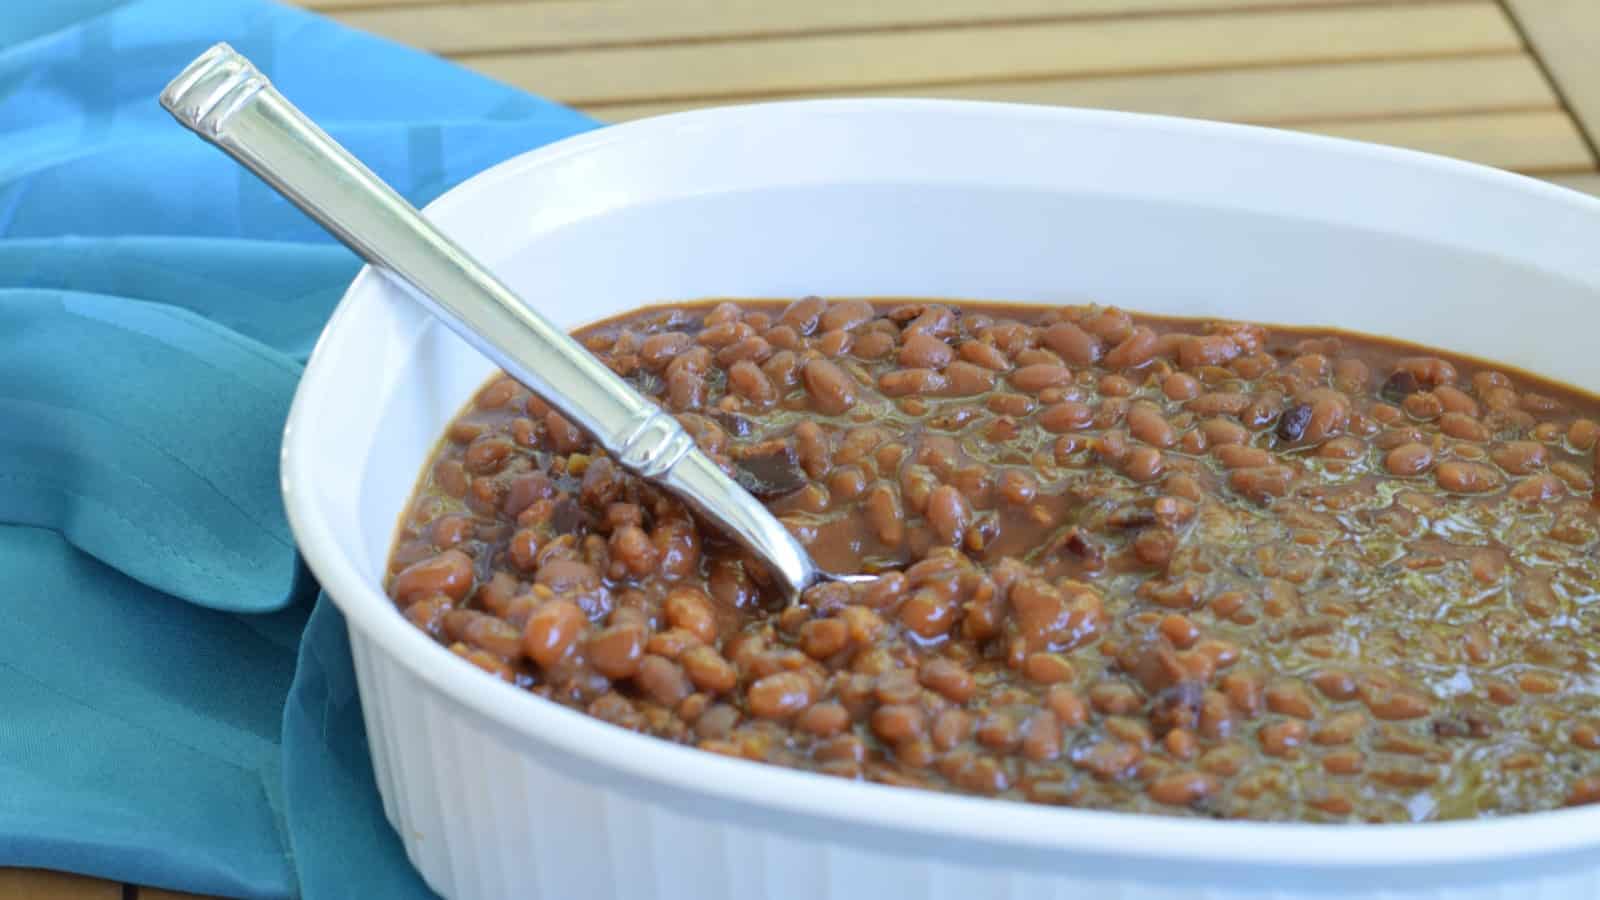 Image shows a white casserole dish filled with homemade baked beans on wooden table with a silver spoon sticking out from it.